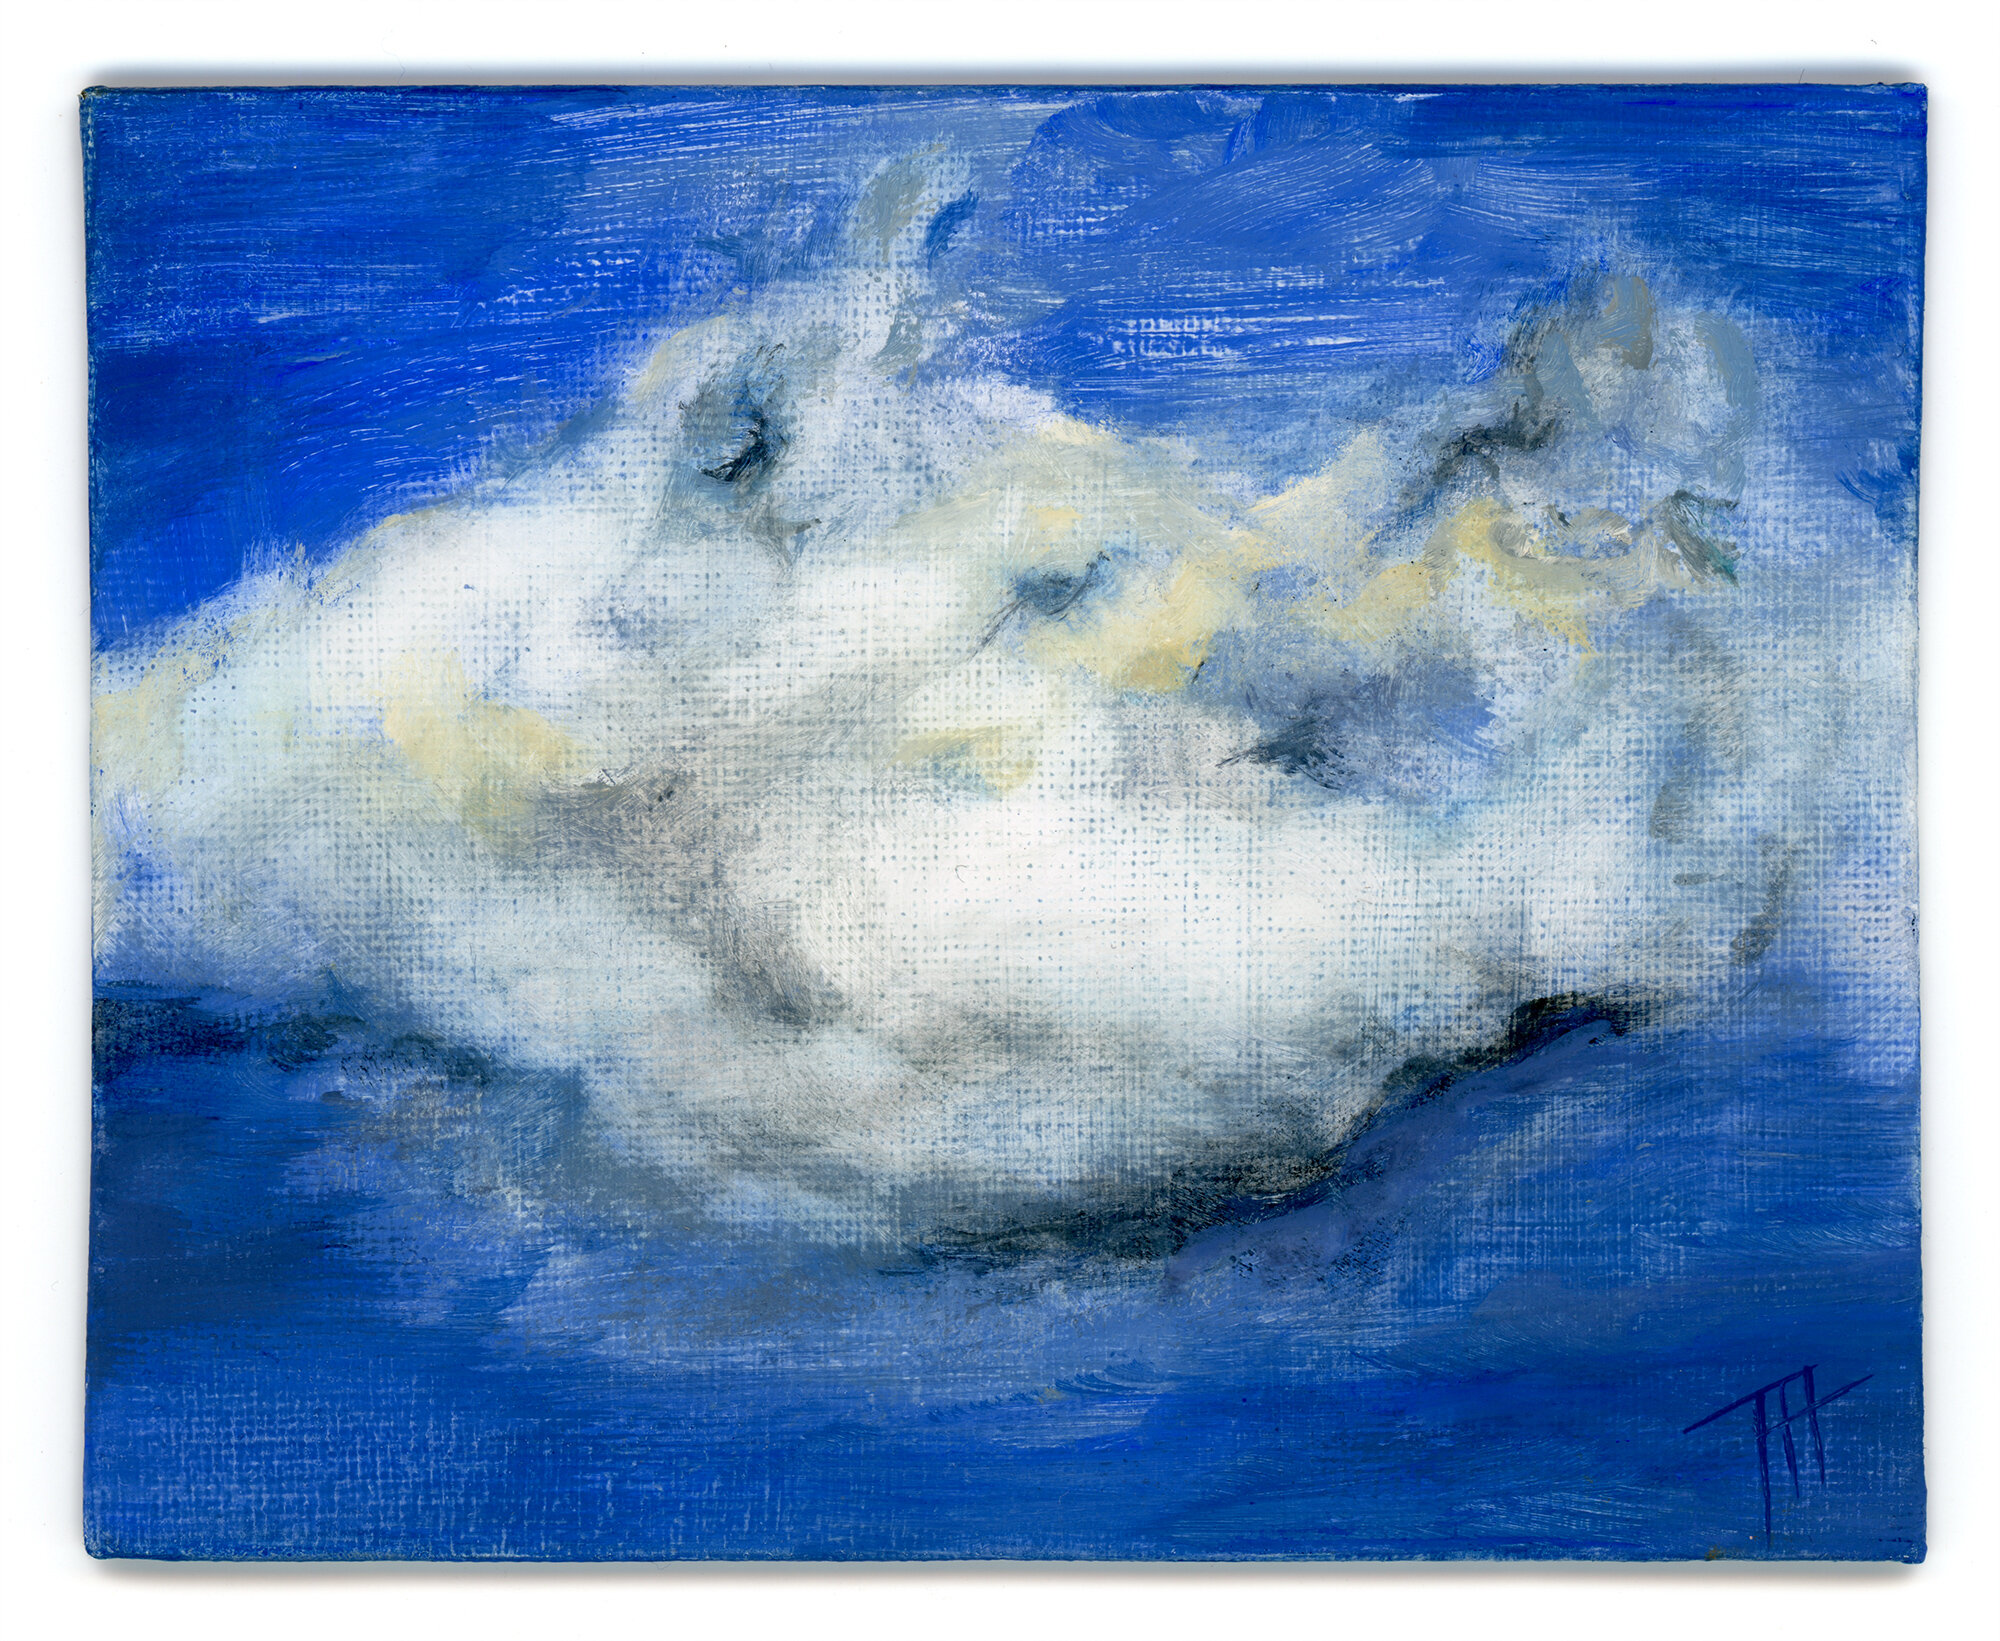  Day Cloud, 2020. 4.75 x 5.9 in. Oil on canvas board. 